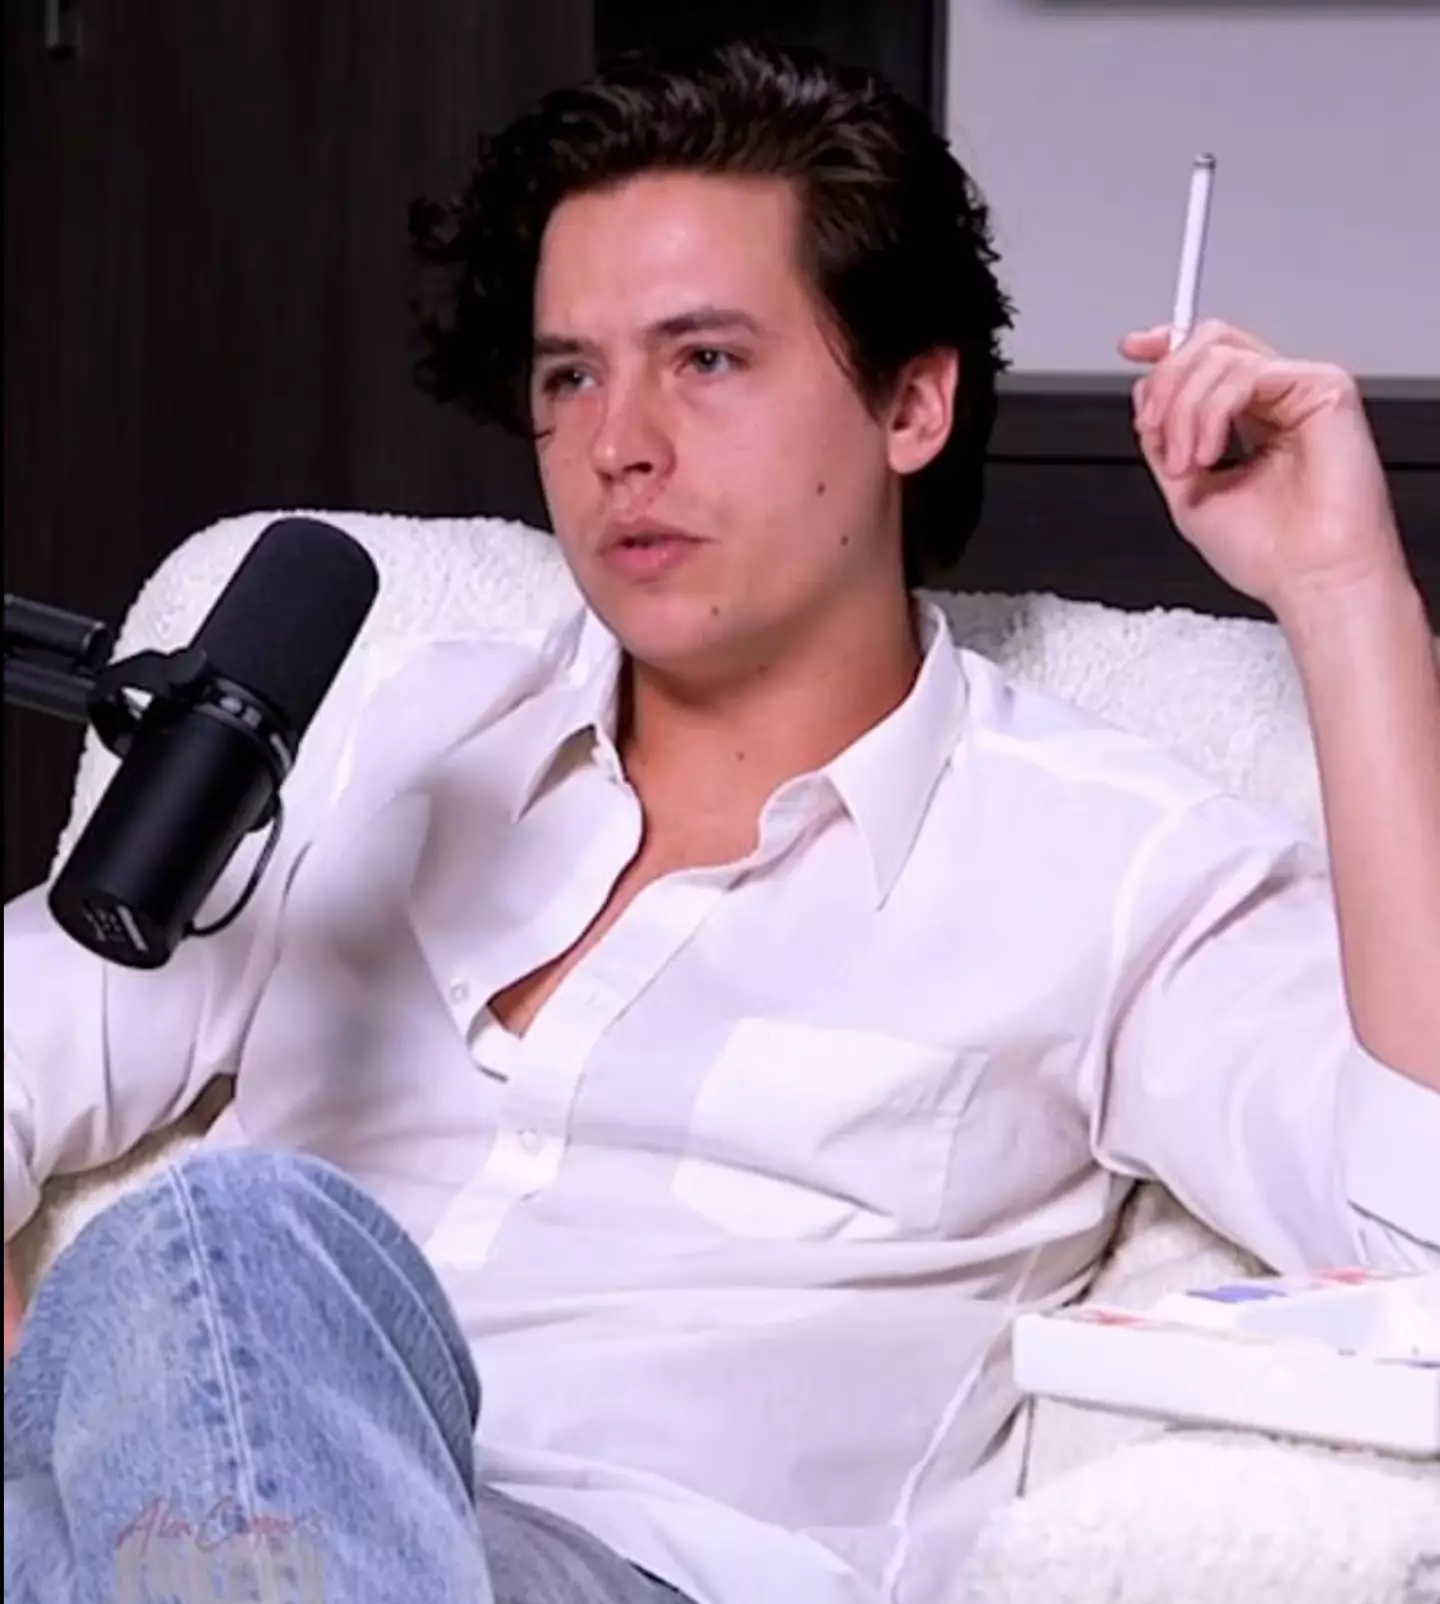 The actor also smoked indoors during the bizarre interview.